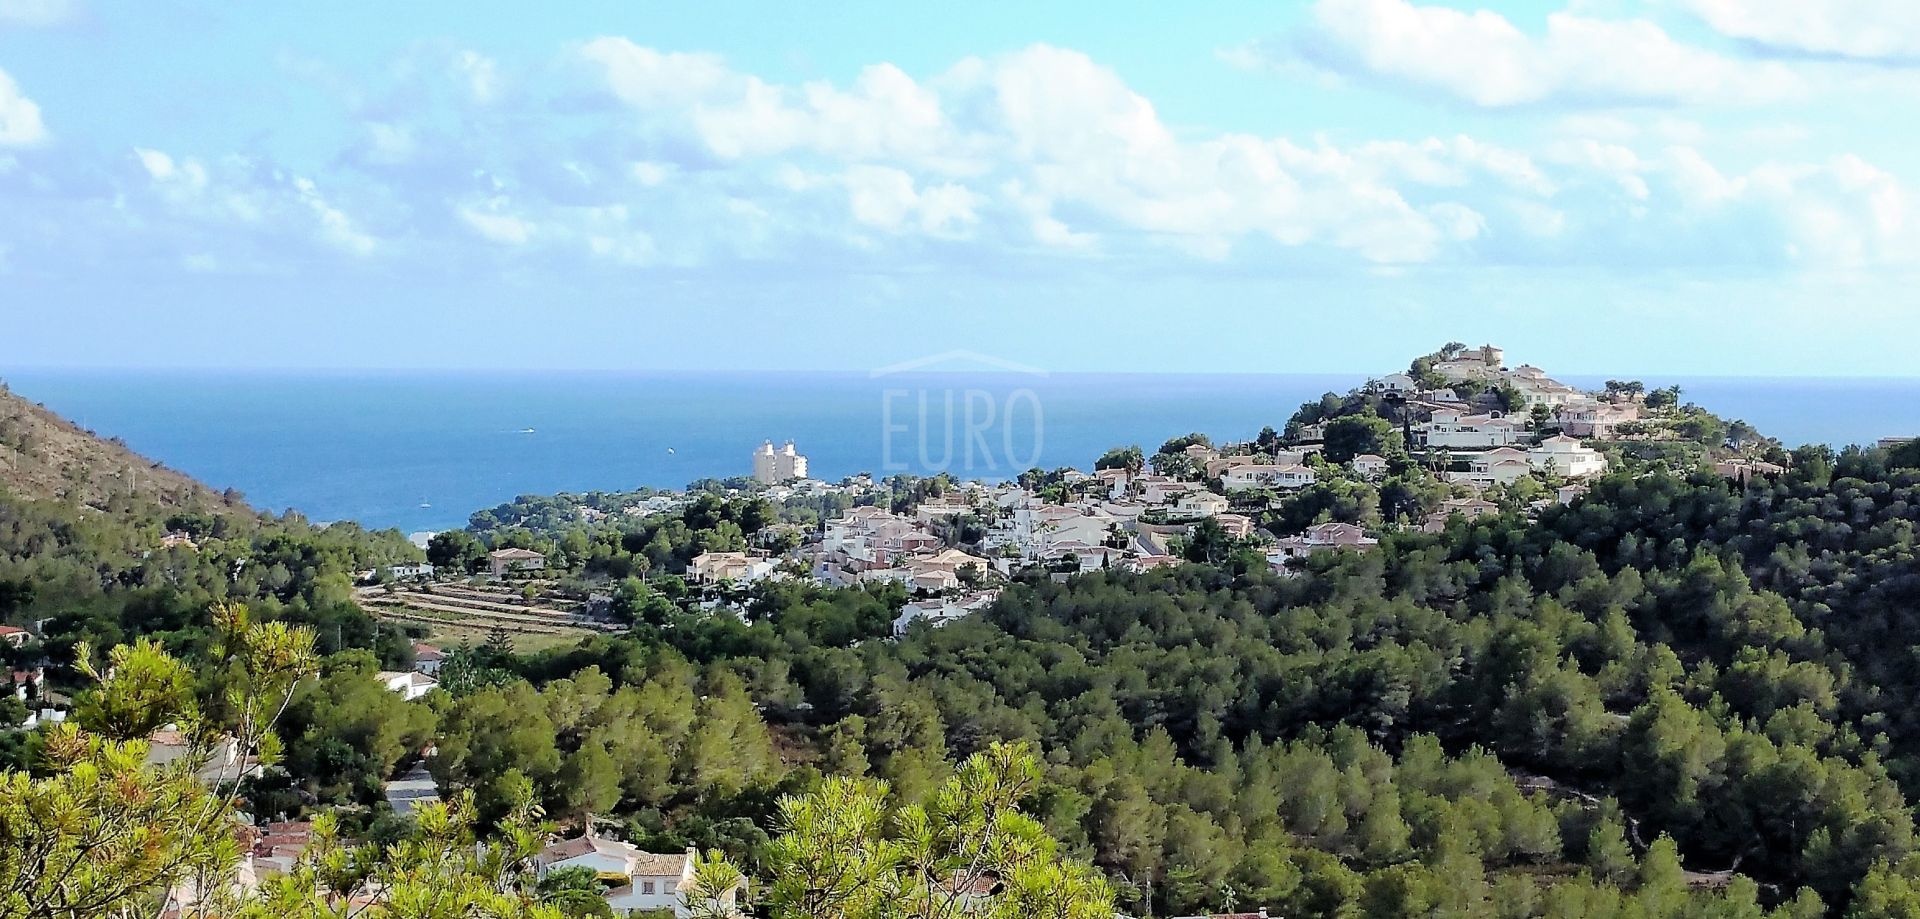 Luxury villa for sale in Moraira at few minutes from Playa del Portet, restaurants and shops.